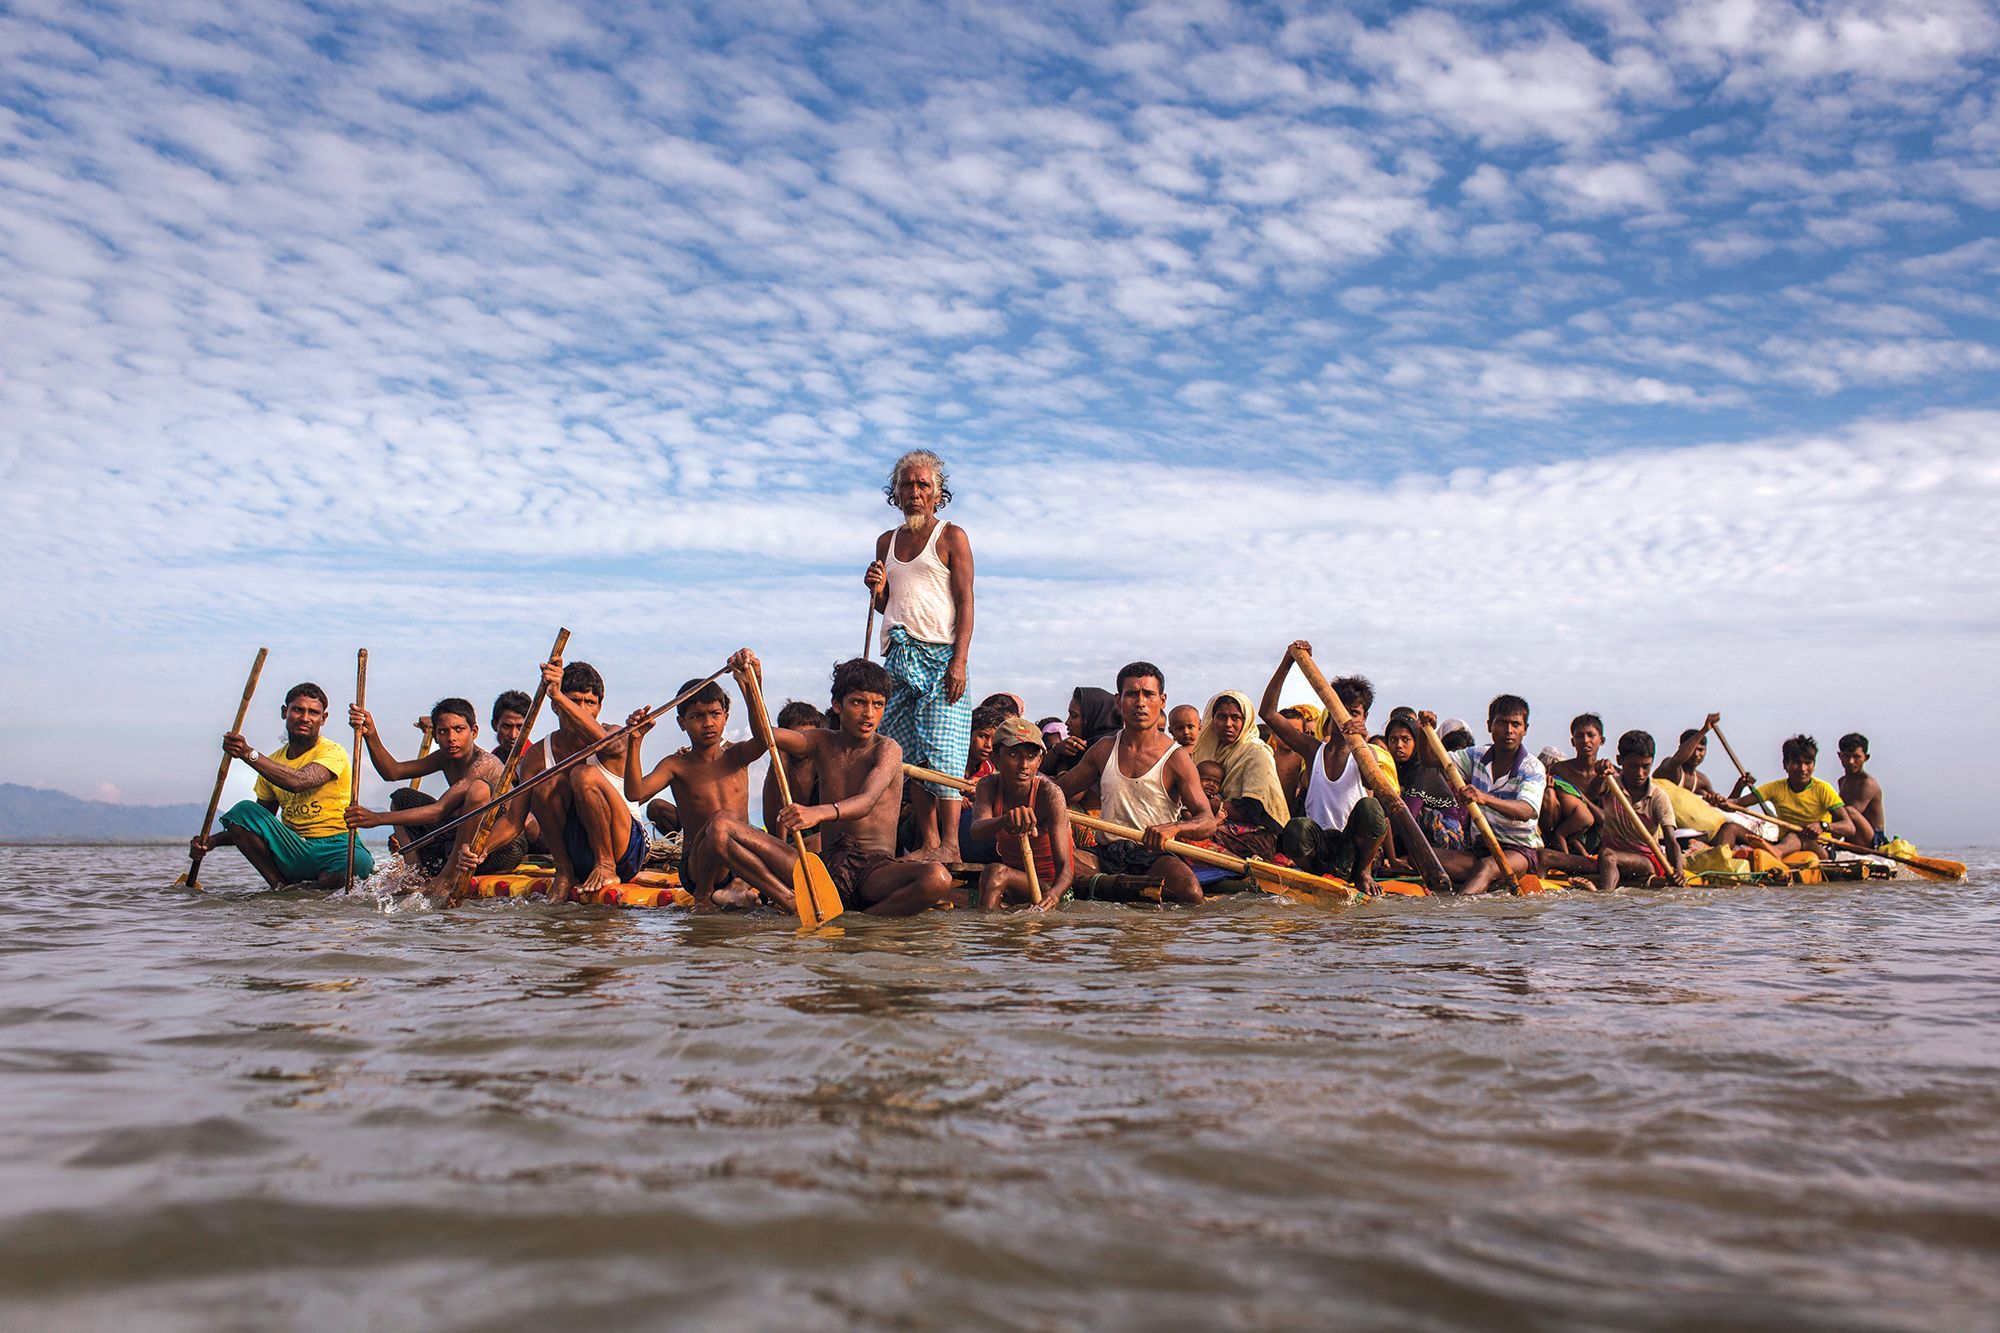 Rohingya fleeing across the Naf River to Bangladesh. The crisis made global headlines in 2015 when boats packed with starving Rohingya were stranded at sea. For weeks, no country would accept them. Image by Patrick Brown/Panos Pictures/UNICEF. Bandladesh, 2017.